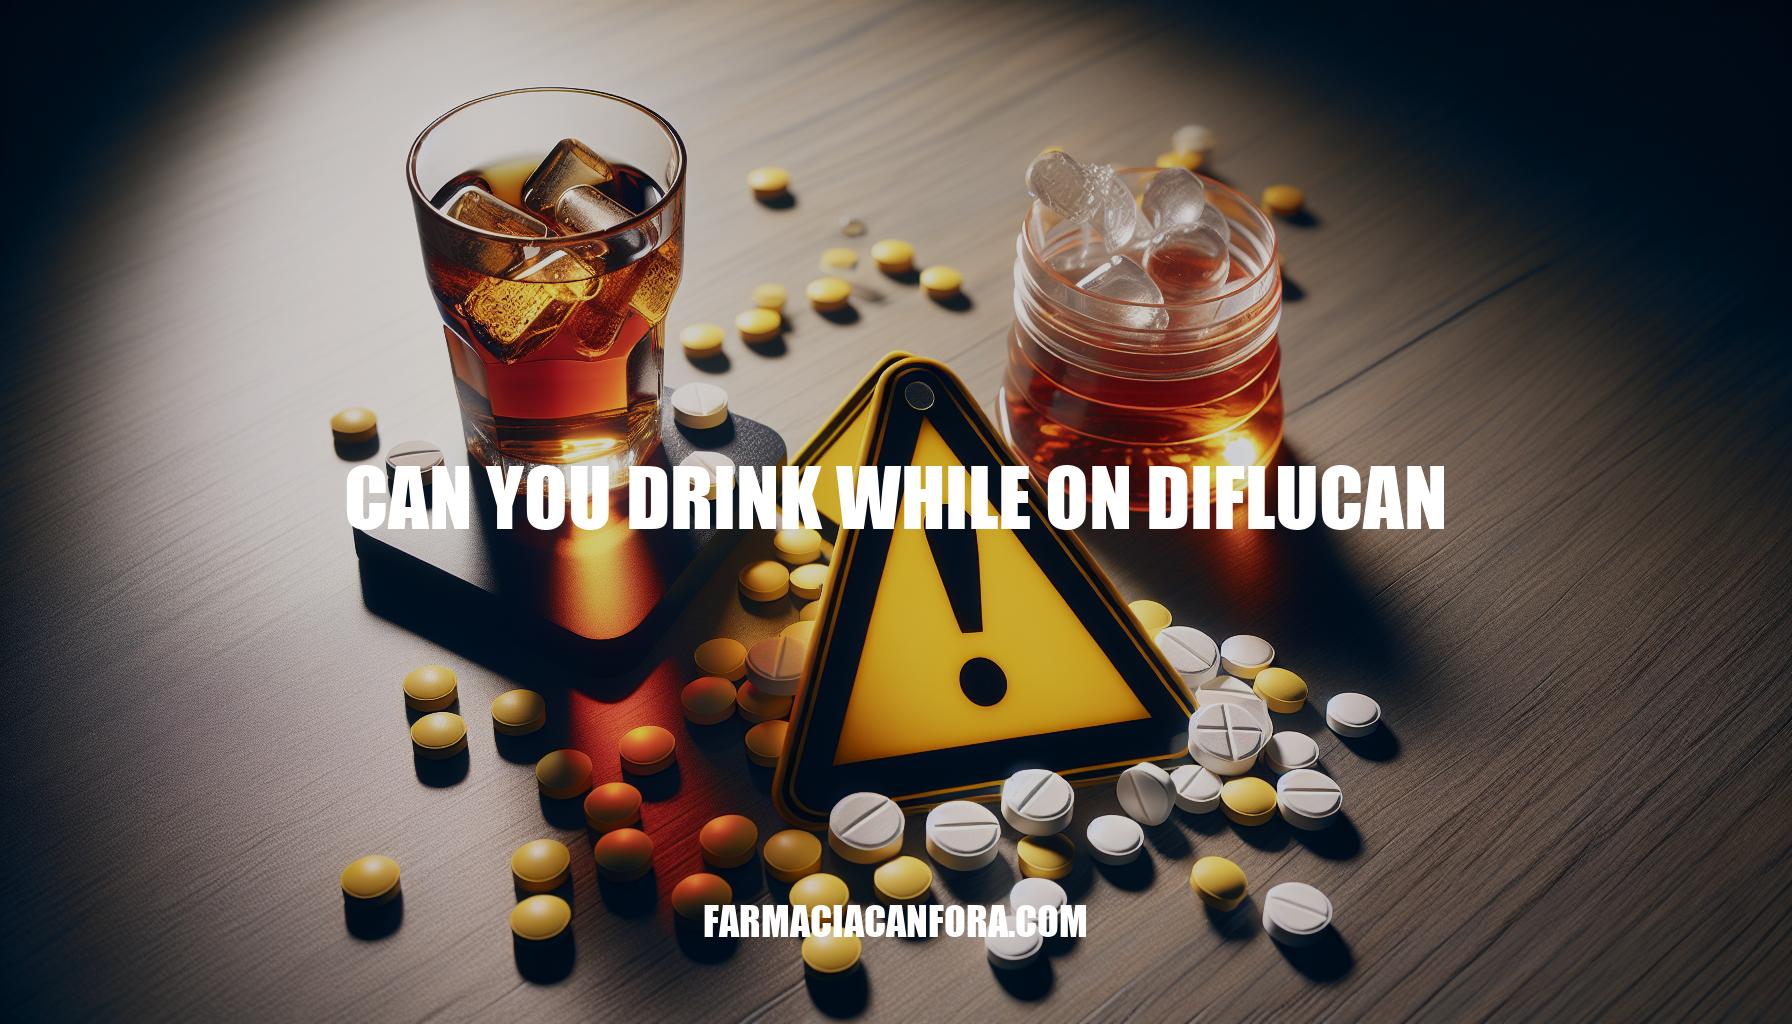 Can You Drink While on Diflucan: Guidelines and Risks